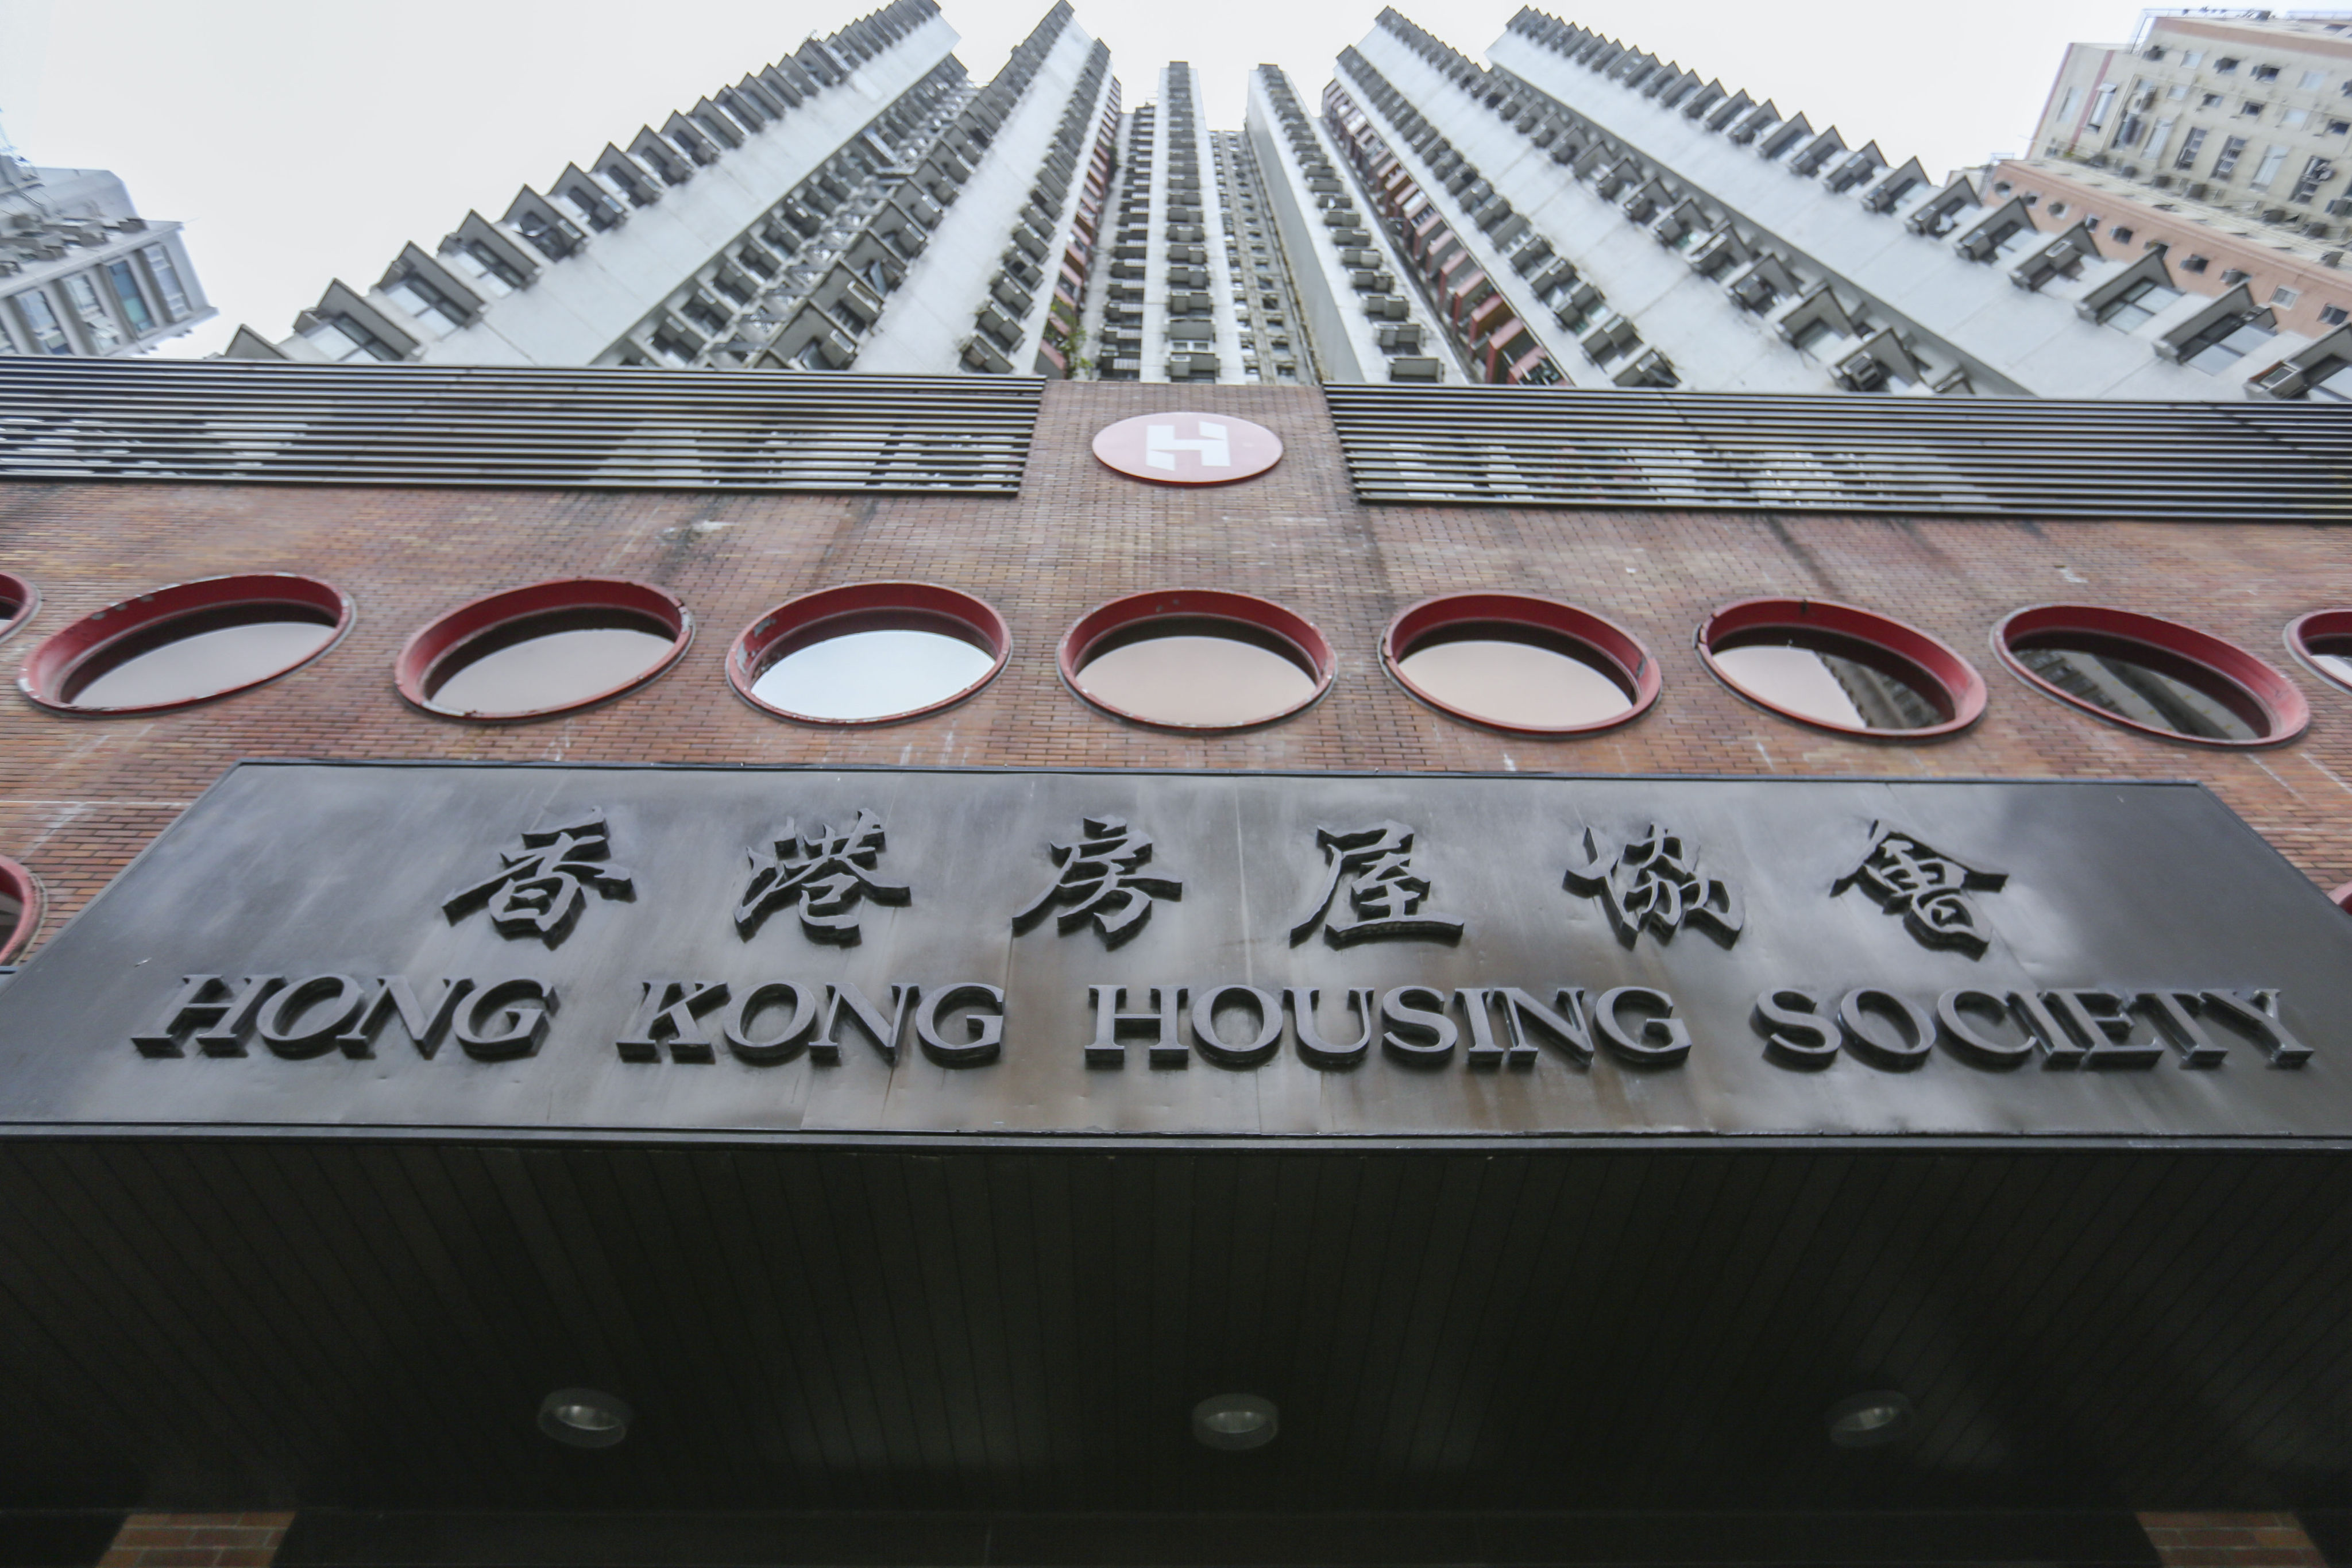 The Hong Kong Housing Society is expected to supply 17,000 public flats in the coming five years. Photo: Xiaomei Chen